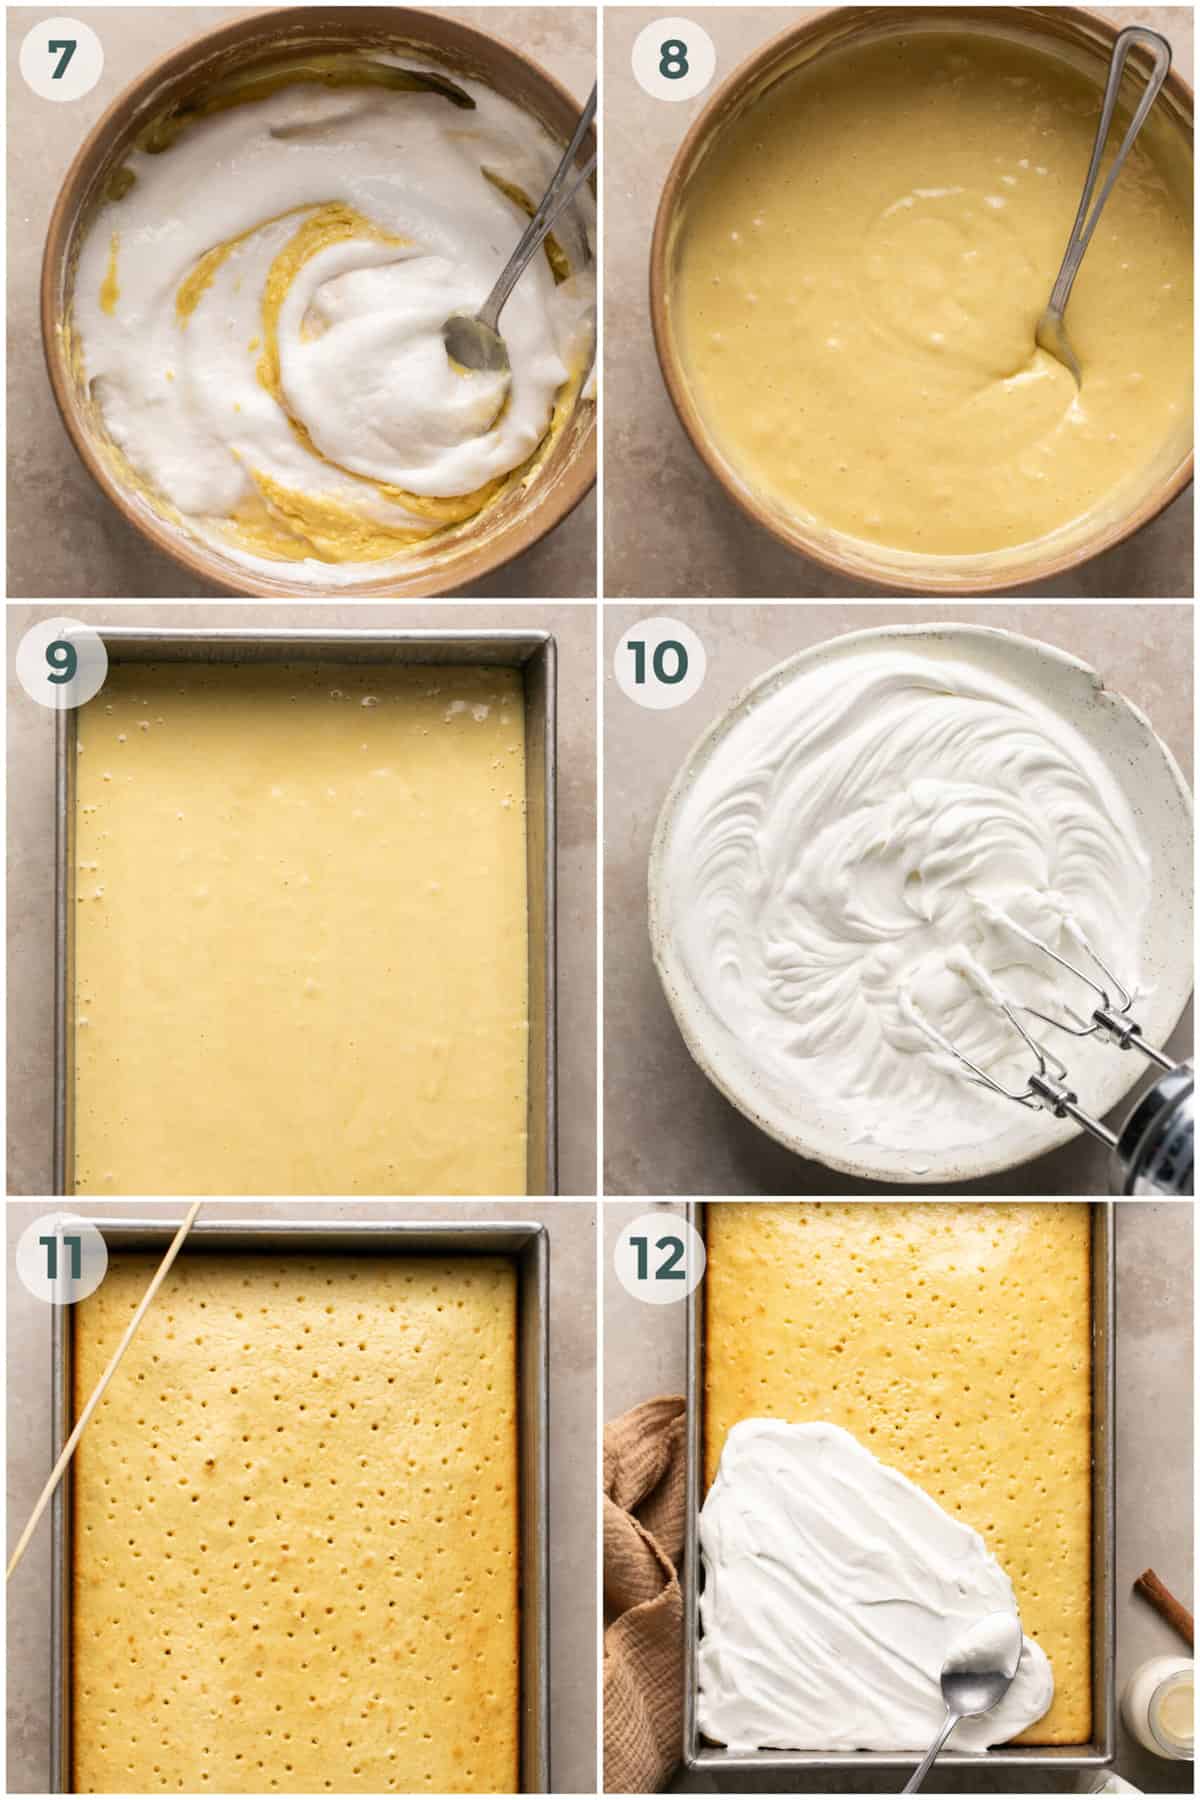 steps 7-12 for making tres leches cake recipe